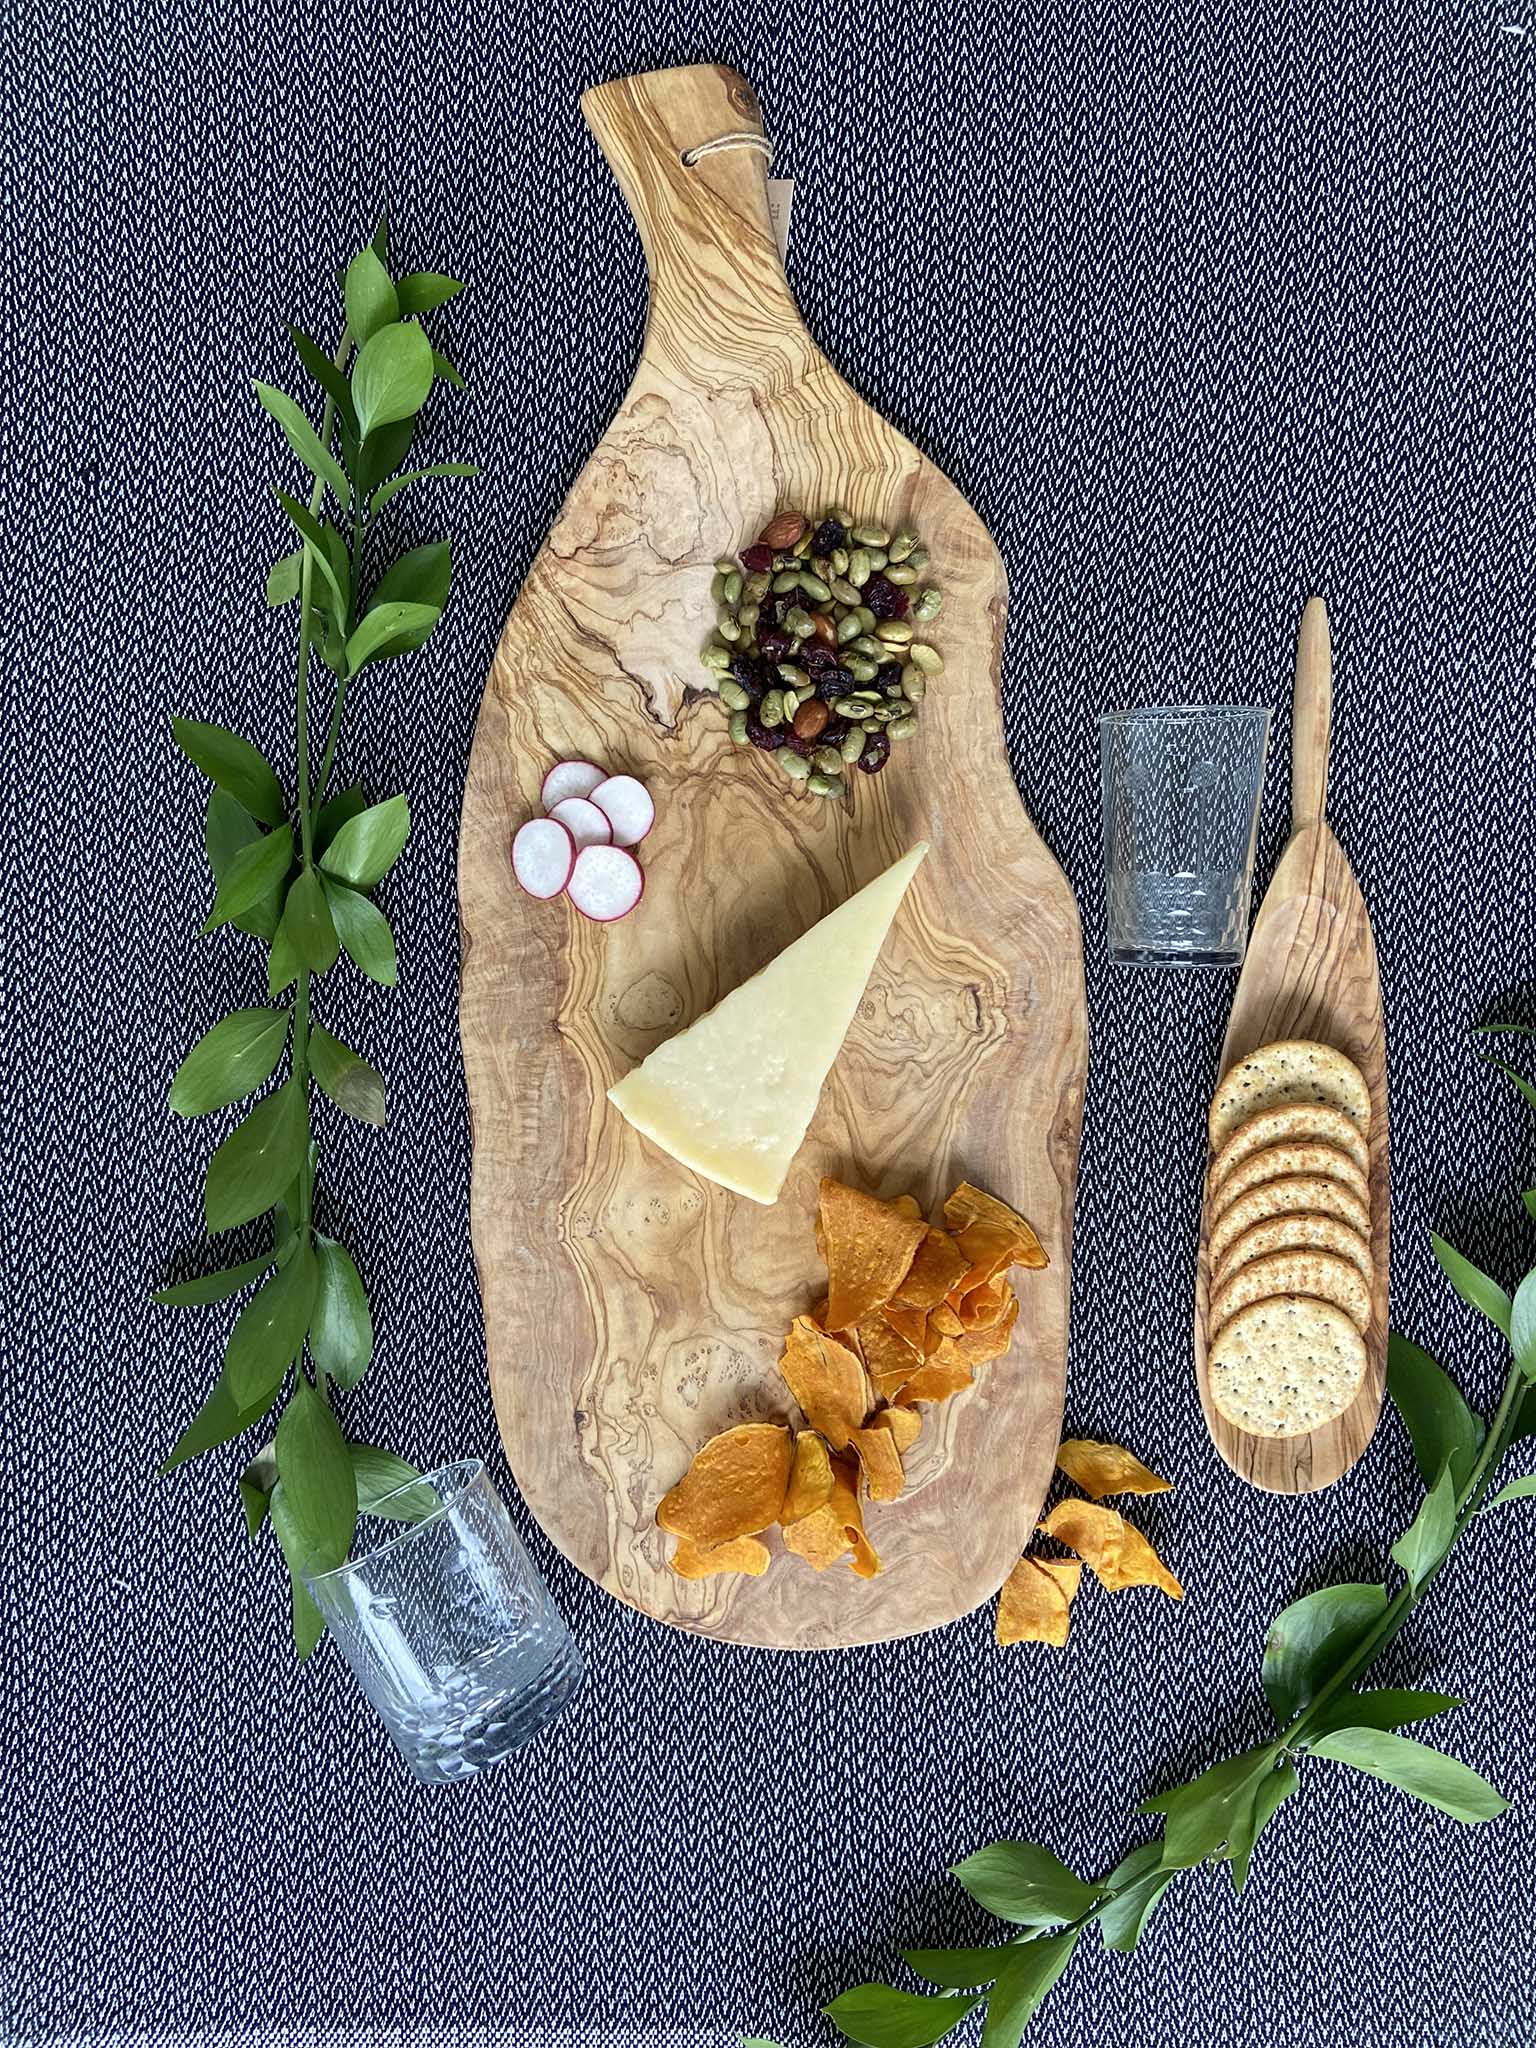 https://www.scentsandfeel.com/wp-content/uploads/2019/02/olive-wood-extra-large-cheese-board-25-inch.jpg